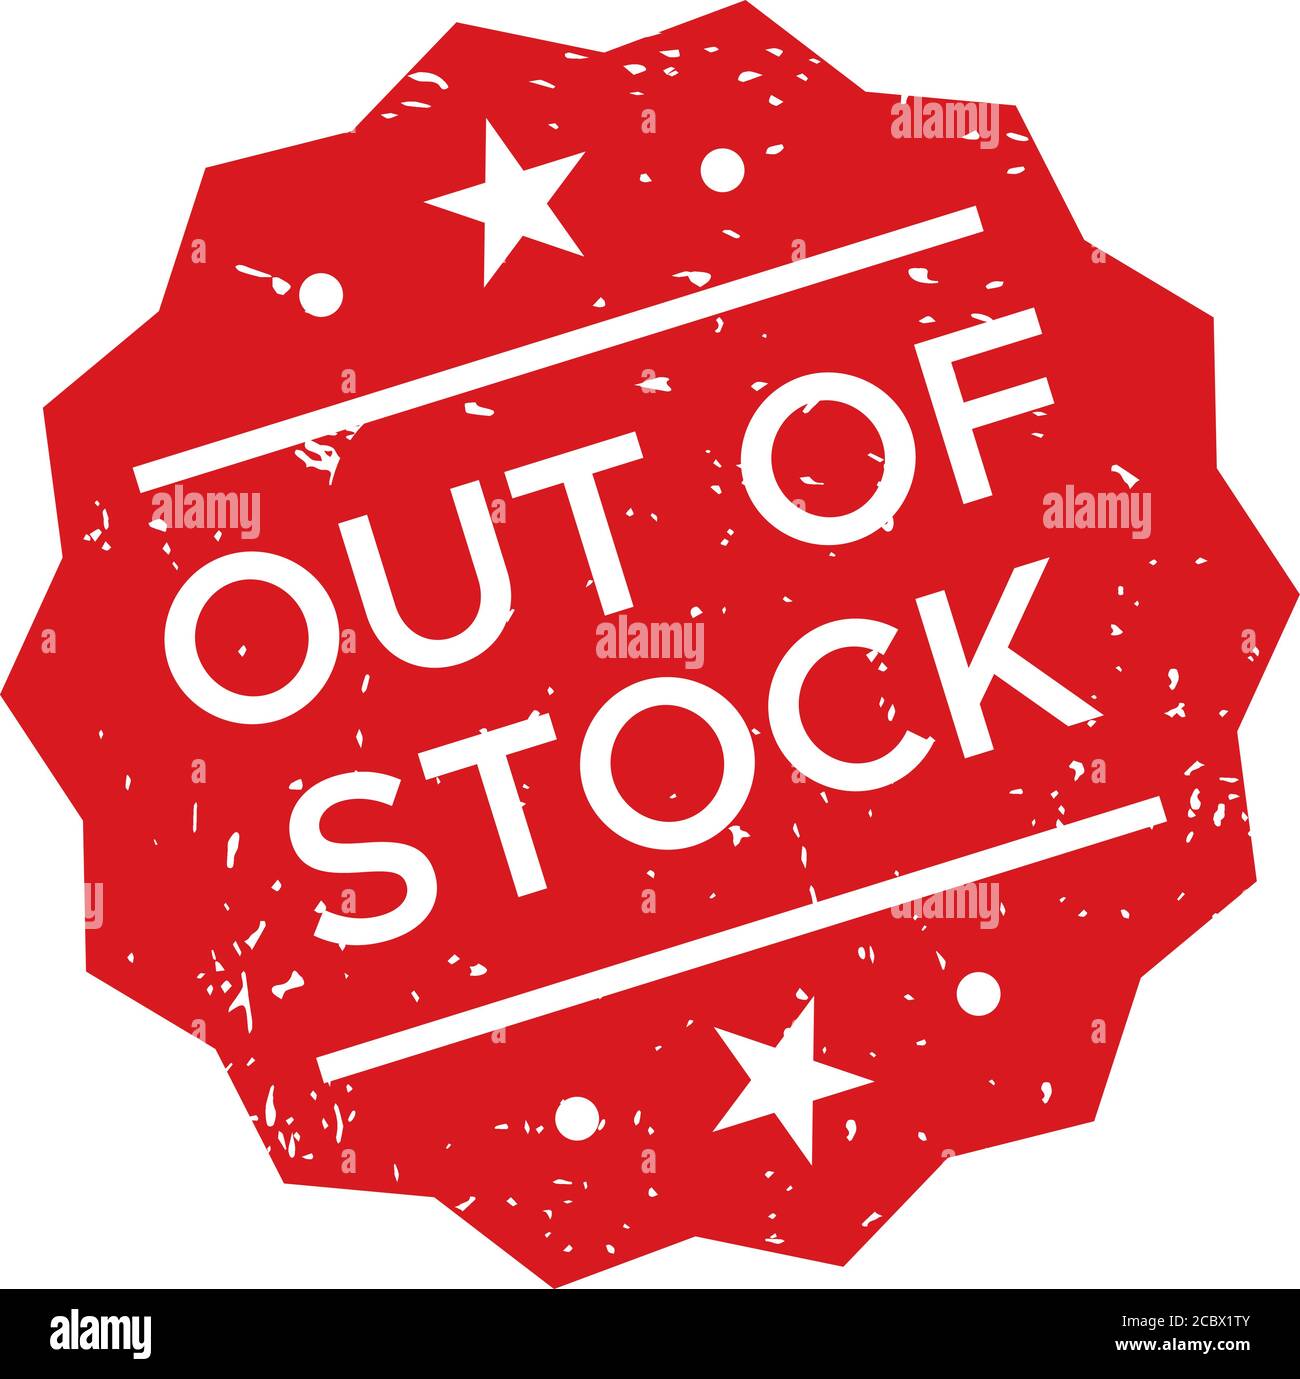 Red out of stock rubber stamp. Polygonal seal with message or text. Grunge label and sales badge for shop Stock Vector